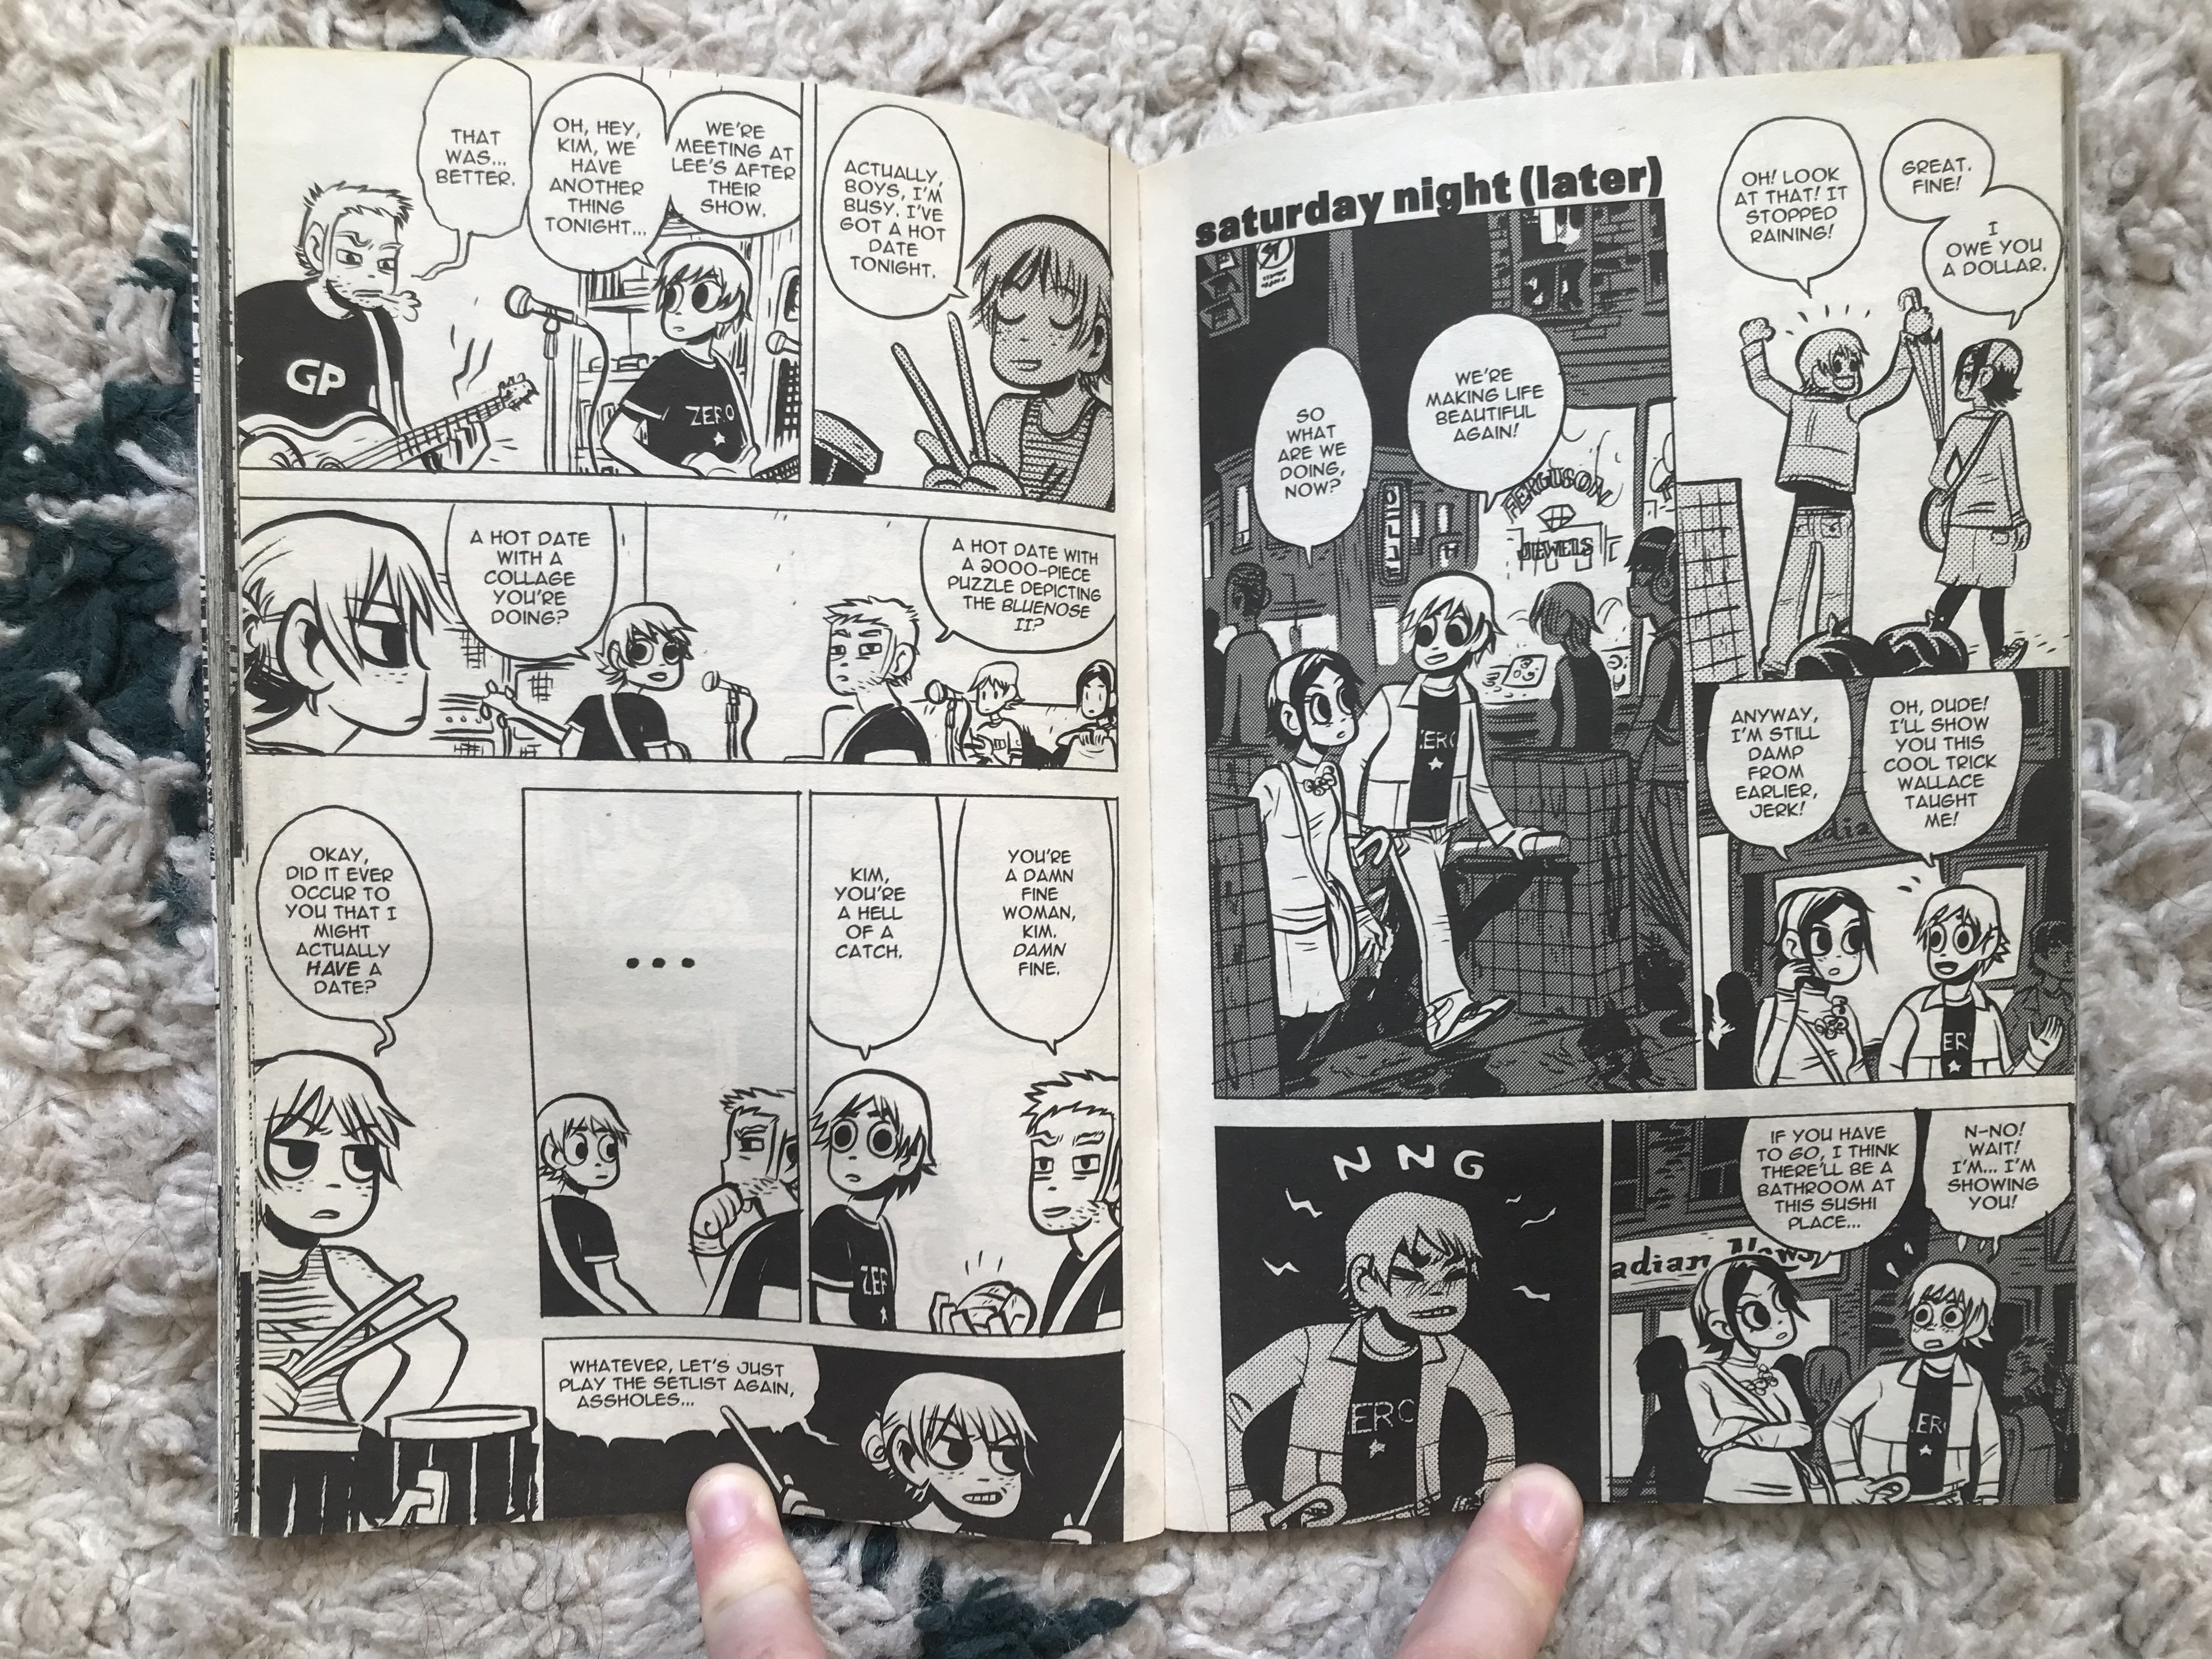 A photo of two black and white pages from the Scott Pilgrim comic books, showing a packed comic layout